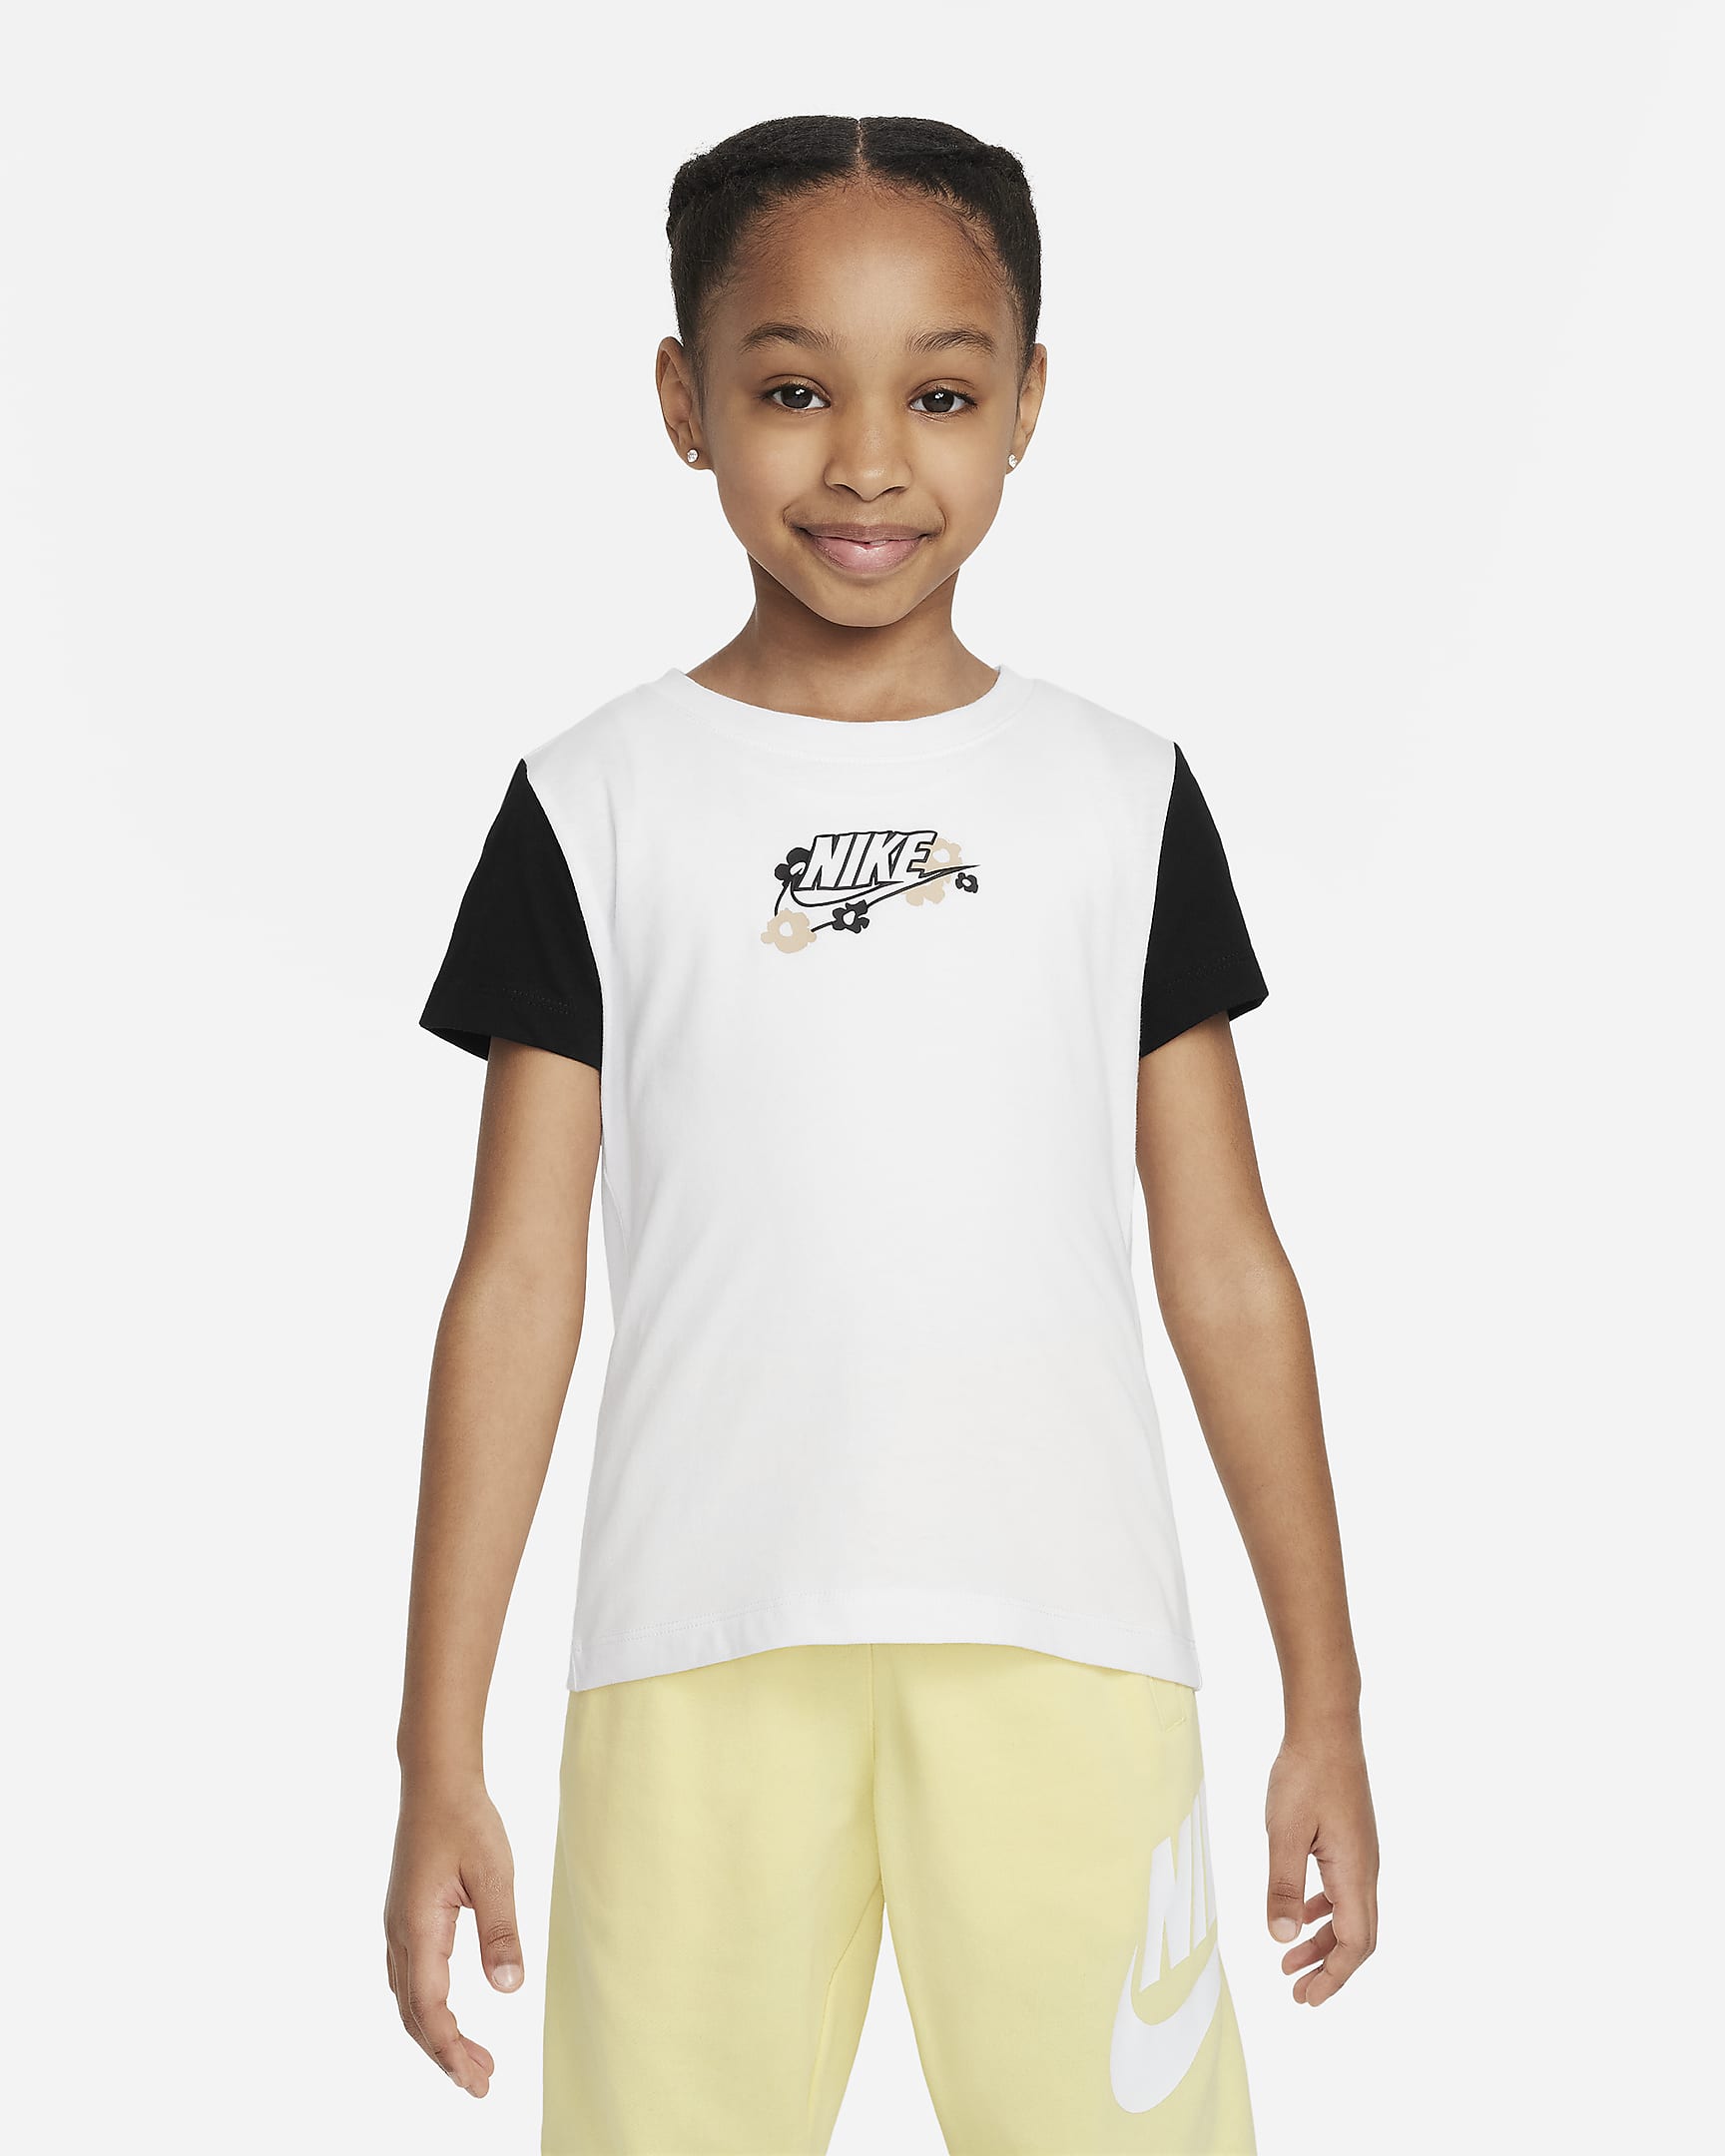 Nike 'Your Move' Younger Kids' Graphic T-Shirt. Nike AT